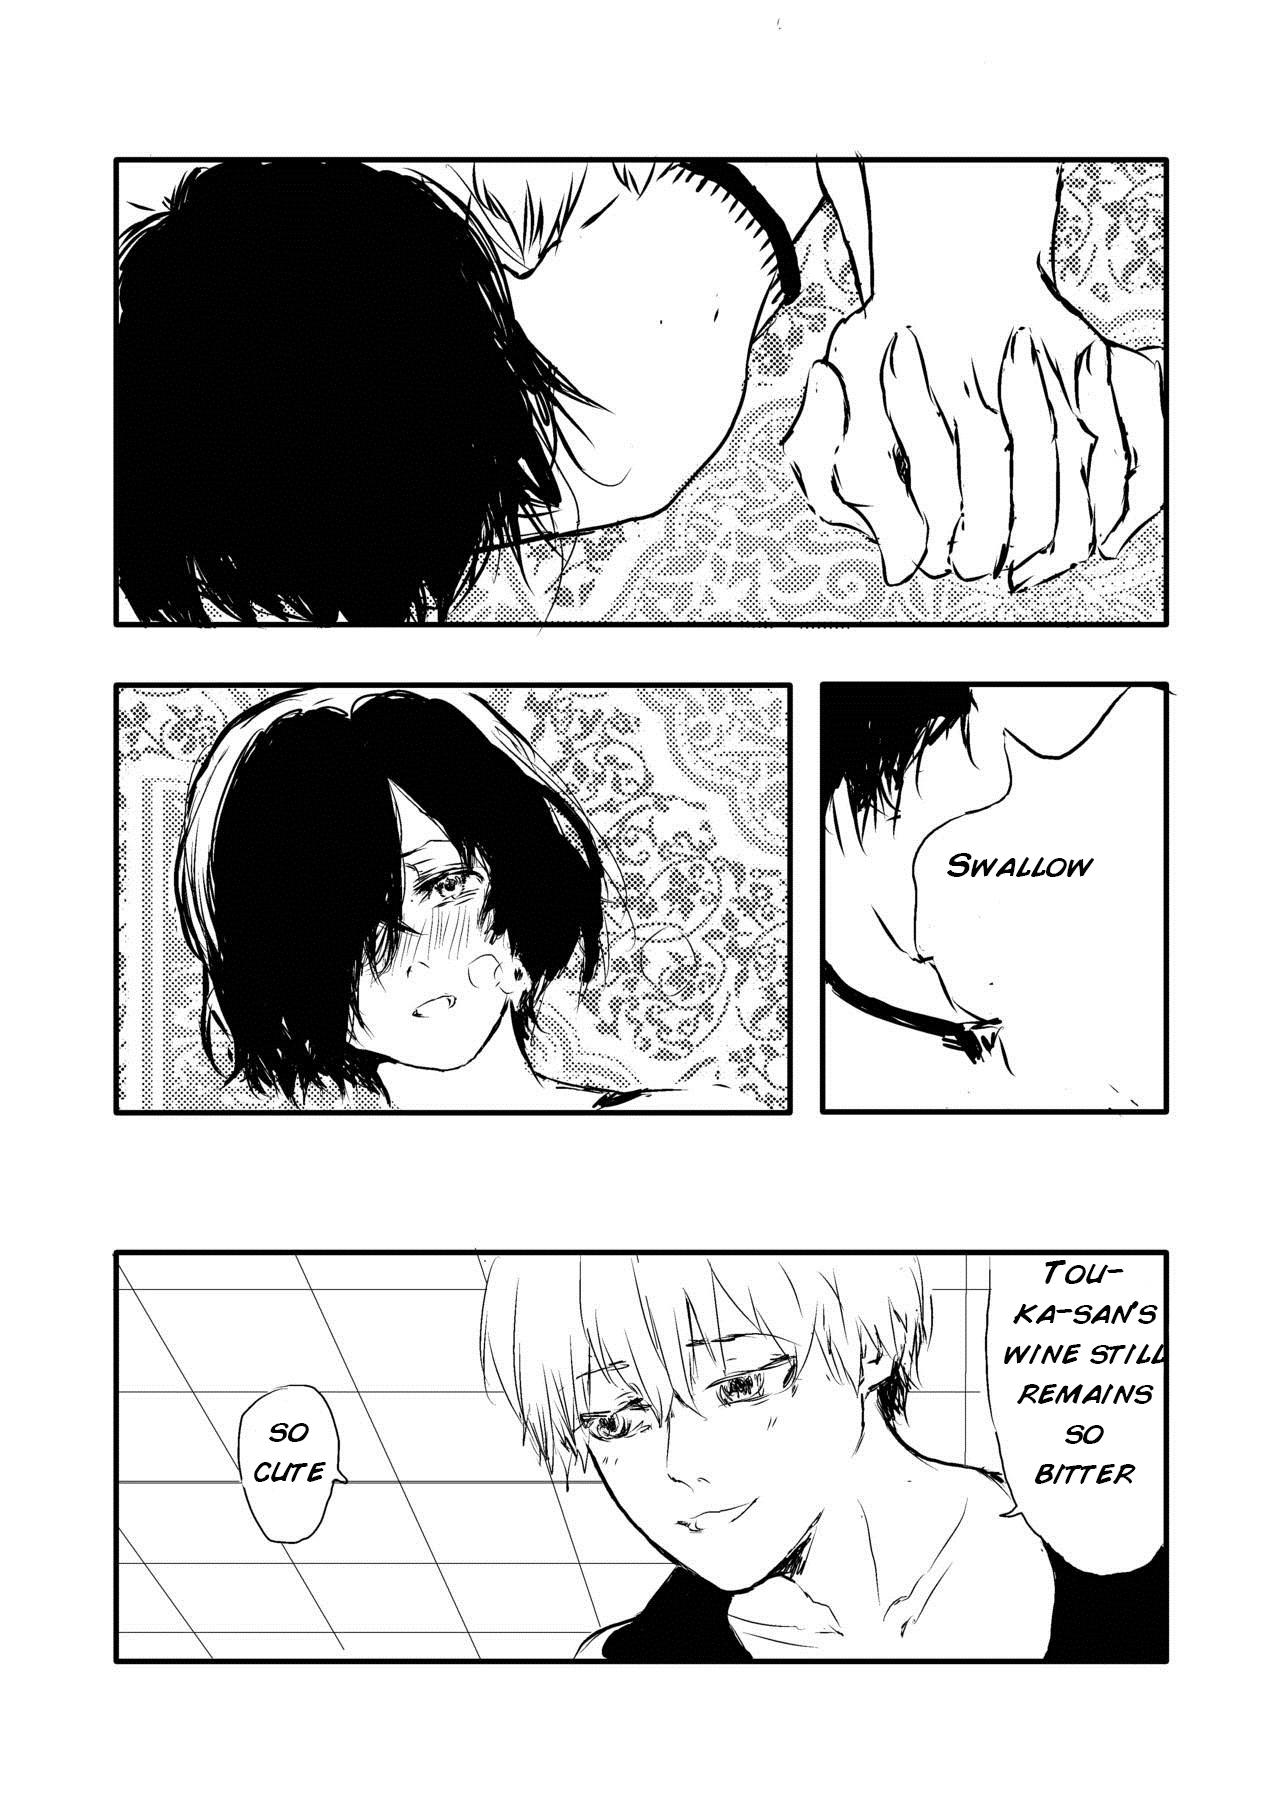 Perfect Melt - Tokyo ghoul Enema - Page 4